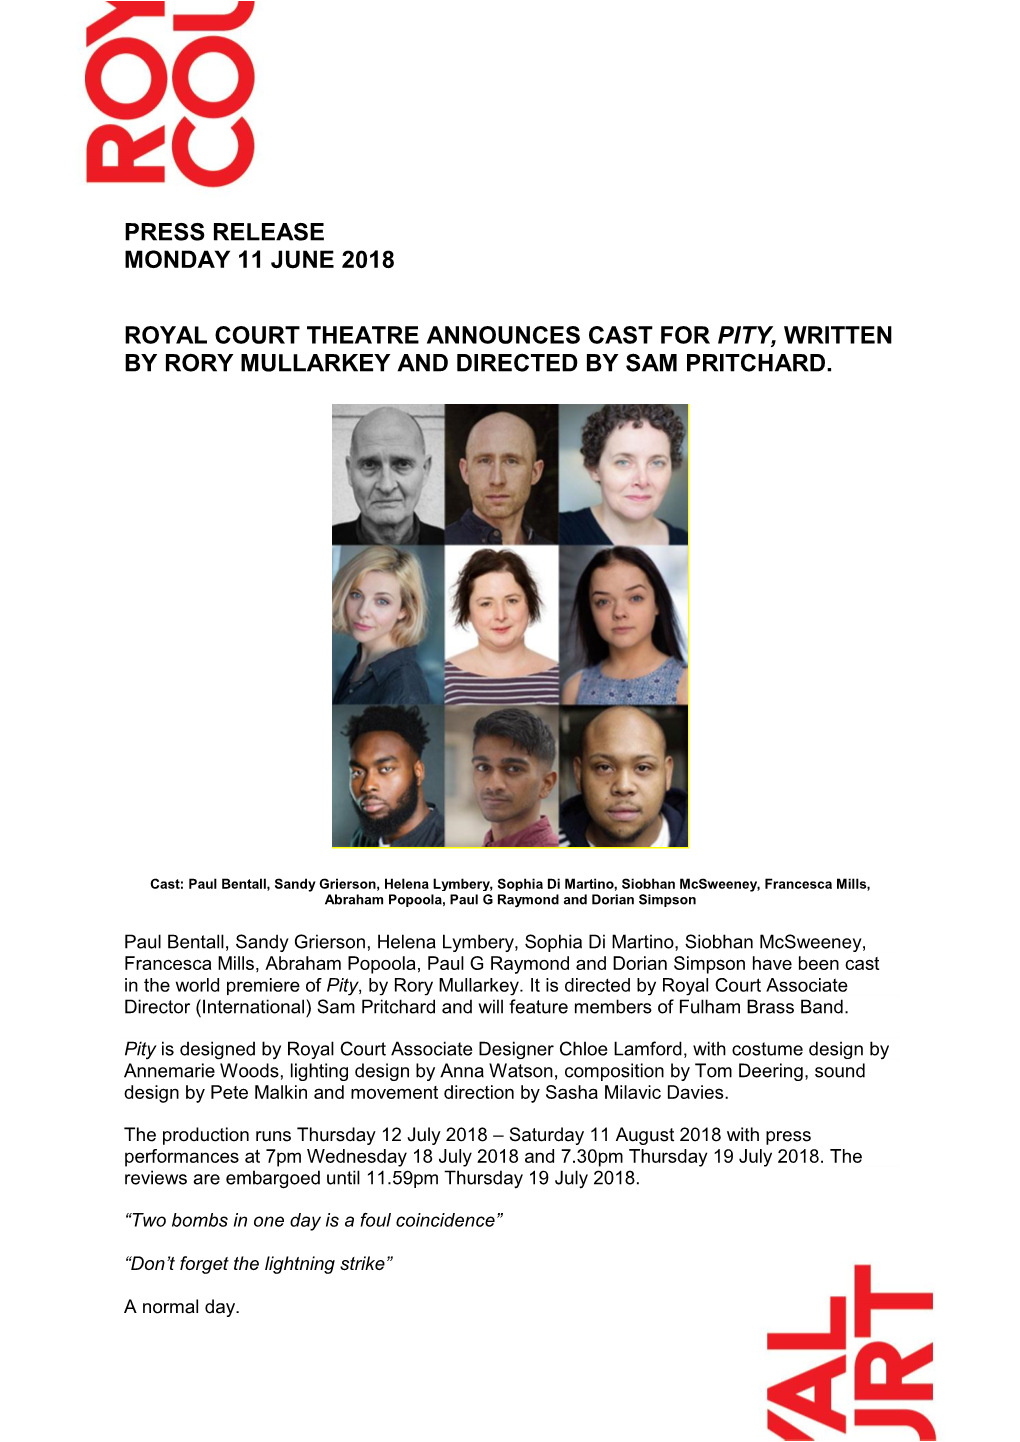 Press Release Monday 11 June 2018 Royal Court Theatre Announces Cast for Pity, Written by Rory Mullarkey and Directed by Sam